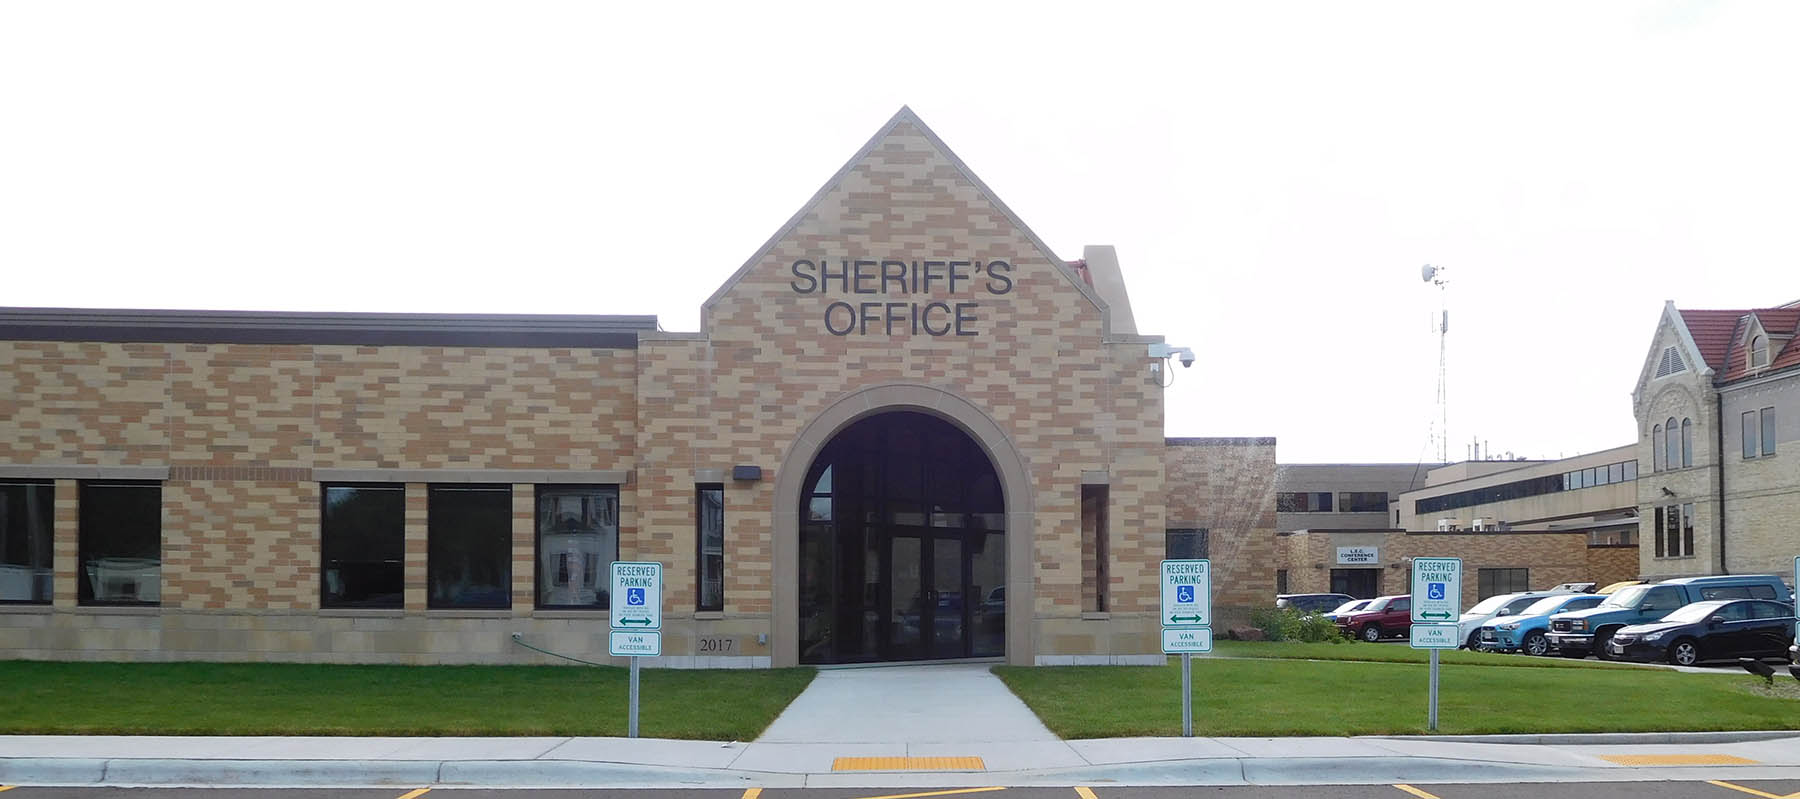 Sheriff's office entrance at Oconto County Law Enforcement Center in Oconto, WI